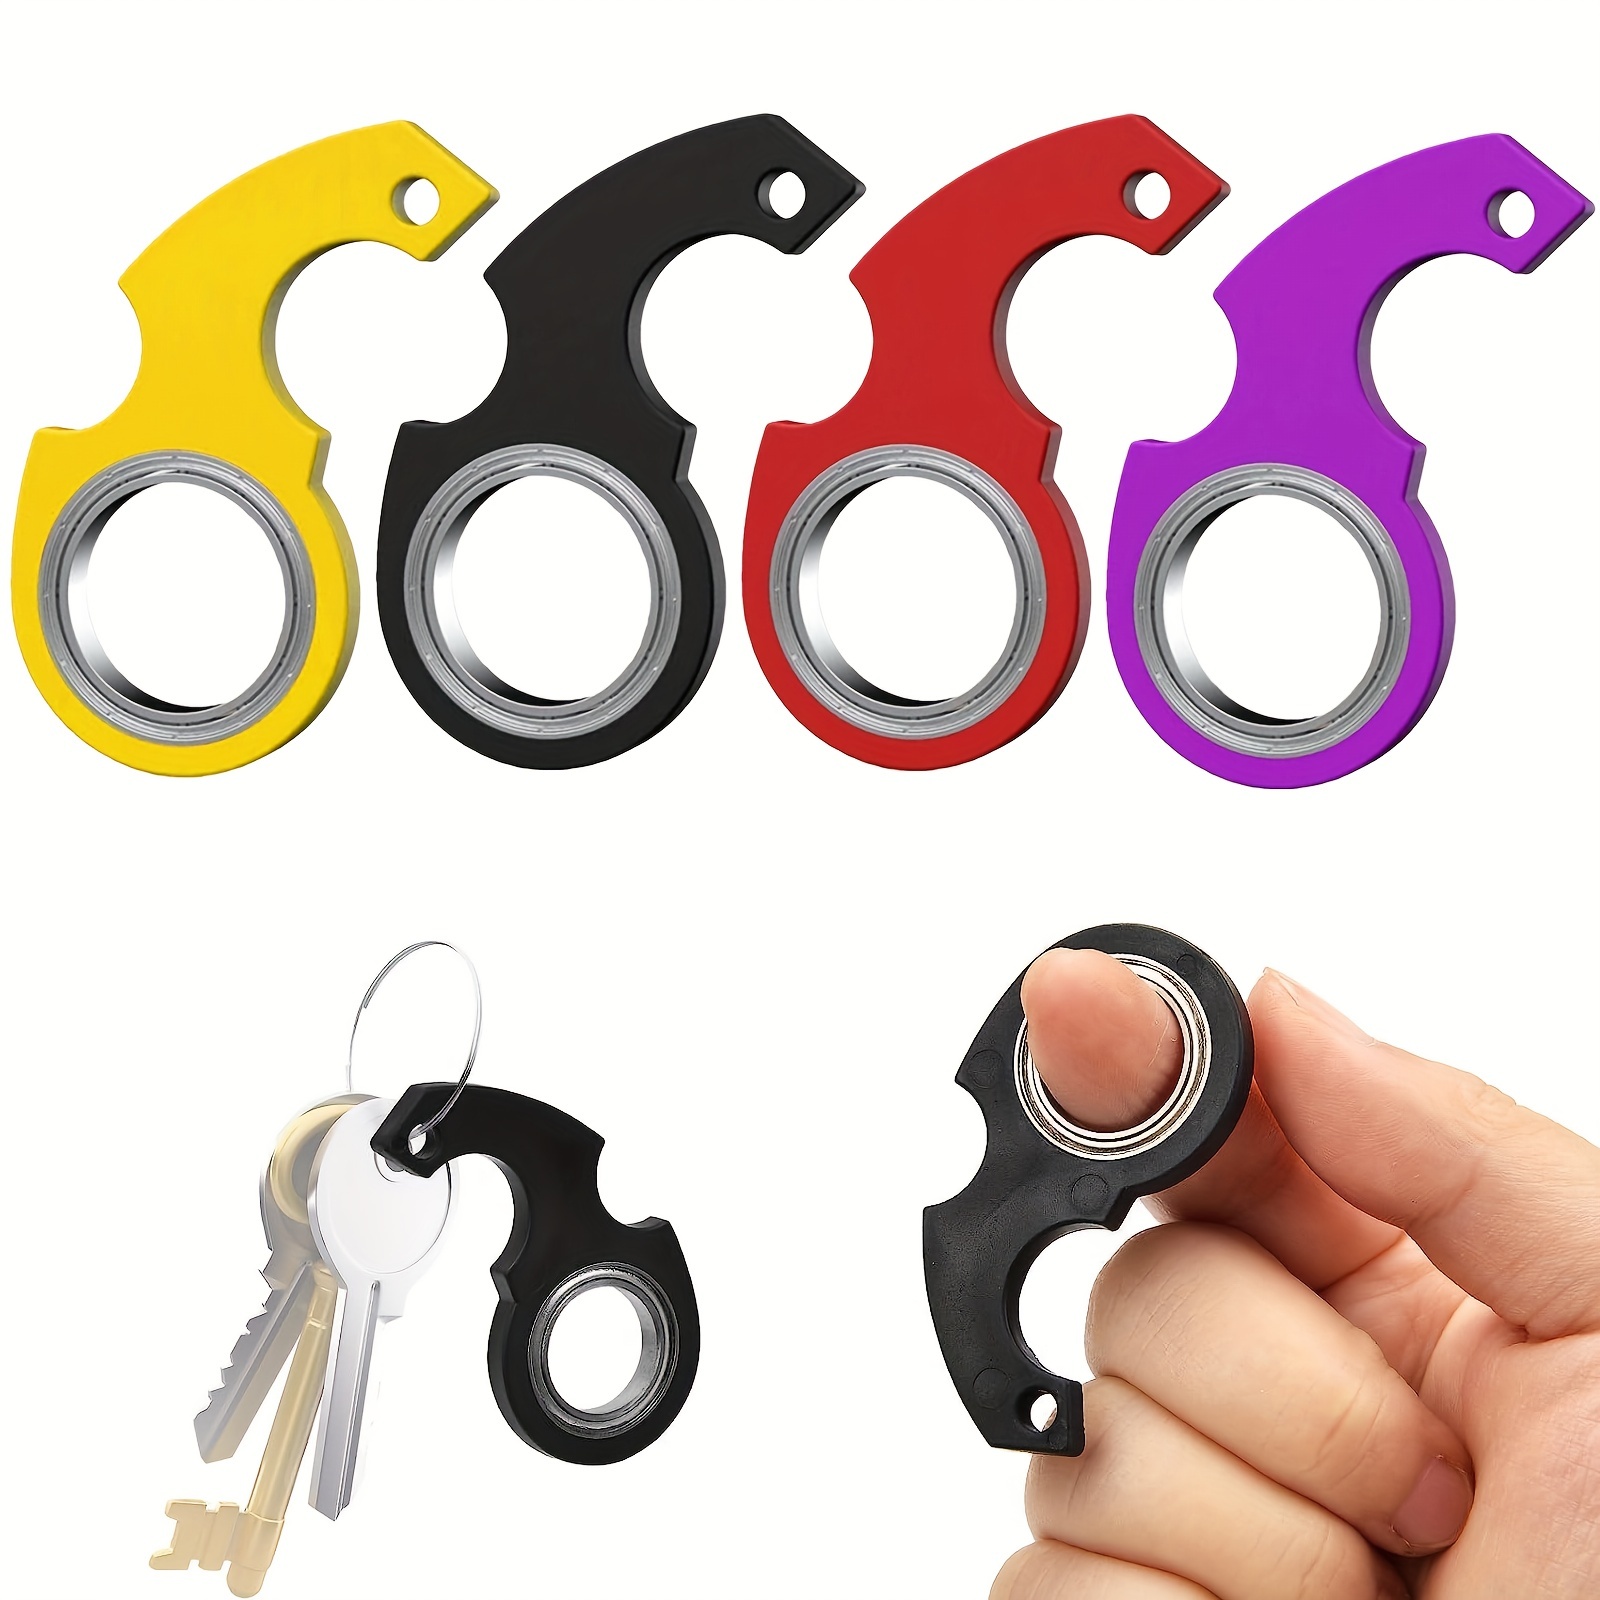 Buy your Fidget Ninja Spinner and enjoy this fashionable toy here